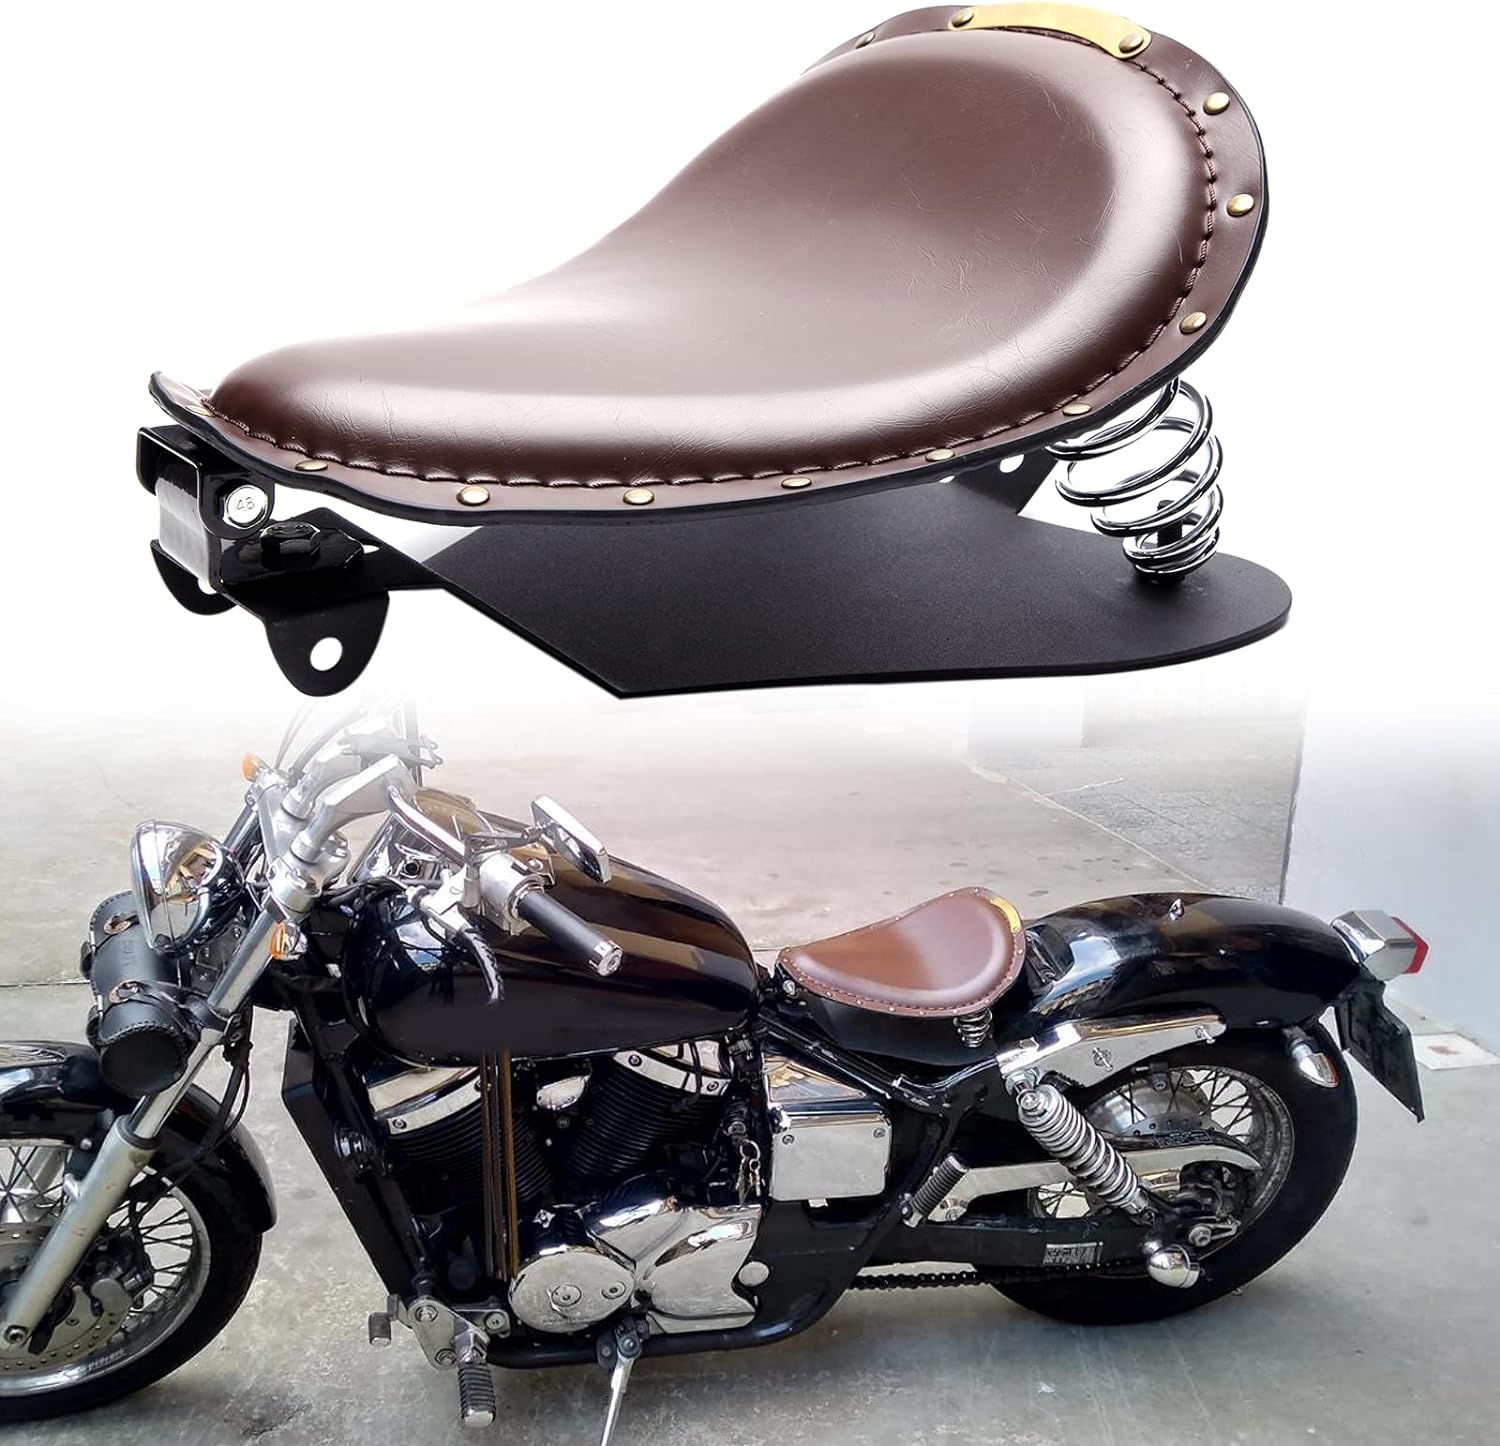 Rich Choices Black Crocodile Leather Solo Seat with Spring Bracket Kit for Harley Davidson Sportster XL 1200 883 48 Chopper Bobber Seats Custom - Rich Choices Crocodile Leather Seat Review